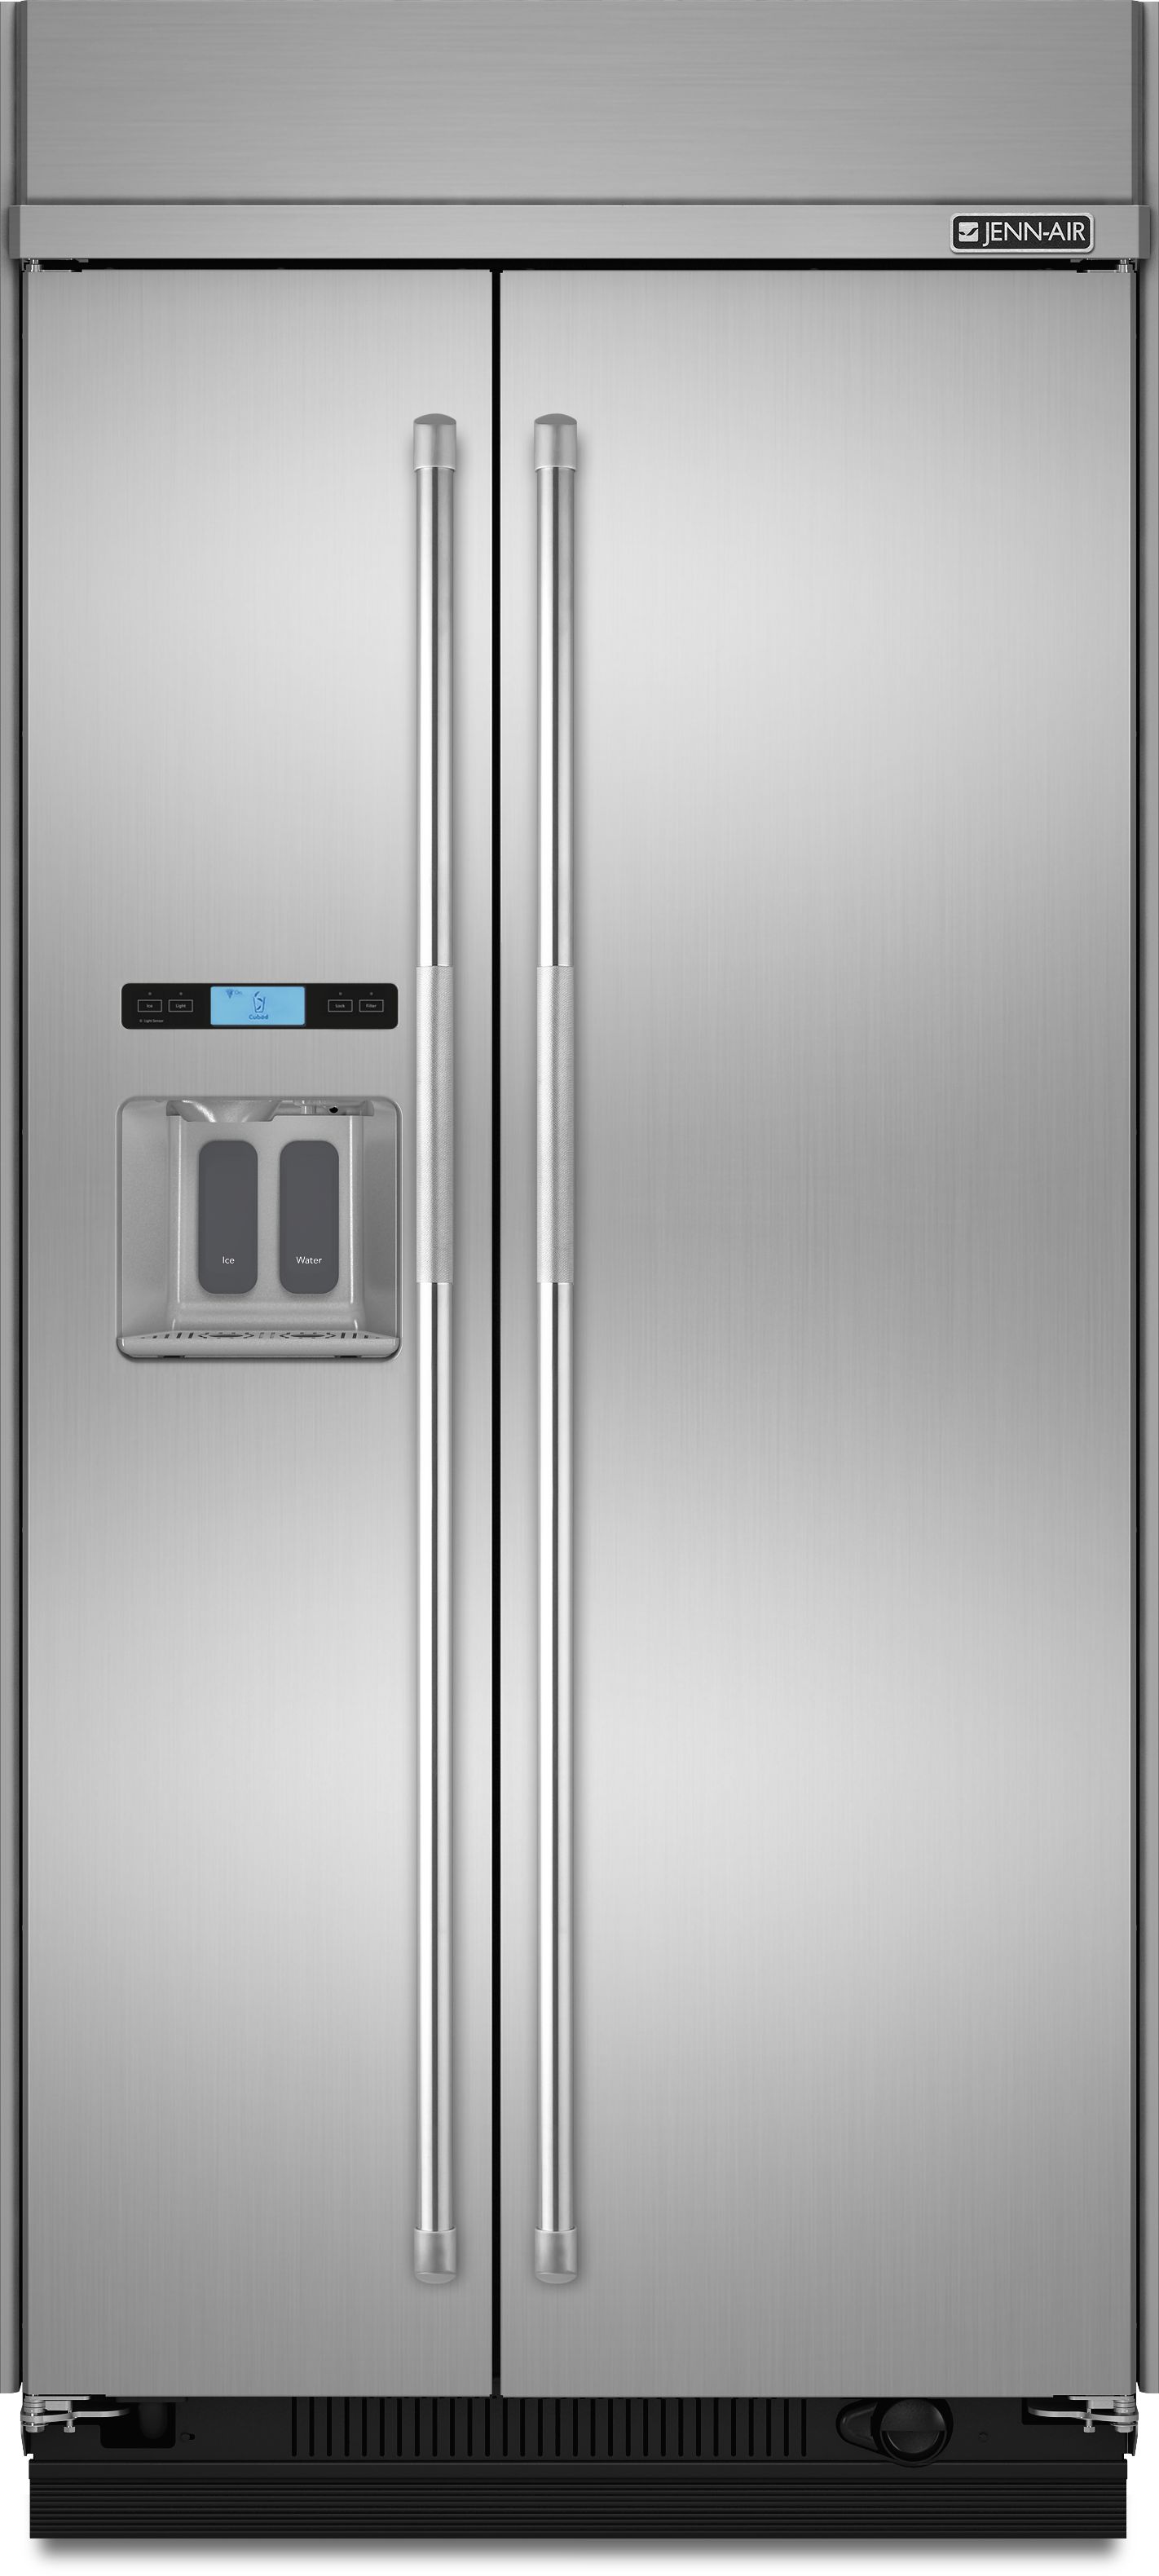 JennAir® 25.0 Cu. Ft. Stainless Steel Built-In Side-By-Side Refrigerator-JS42PPDUDE